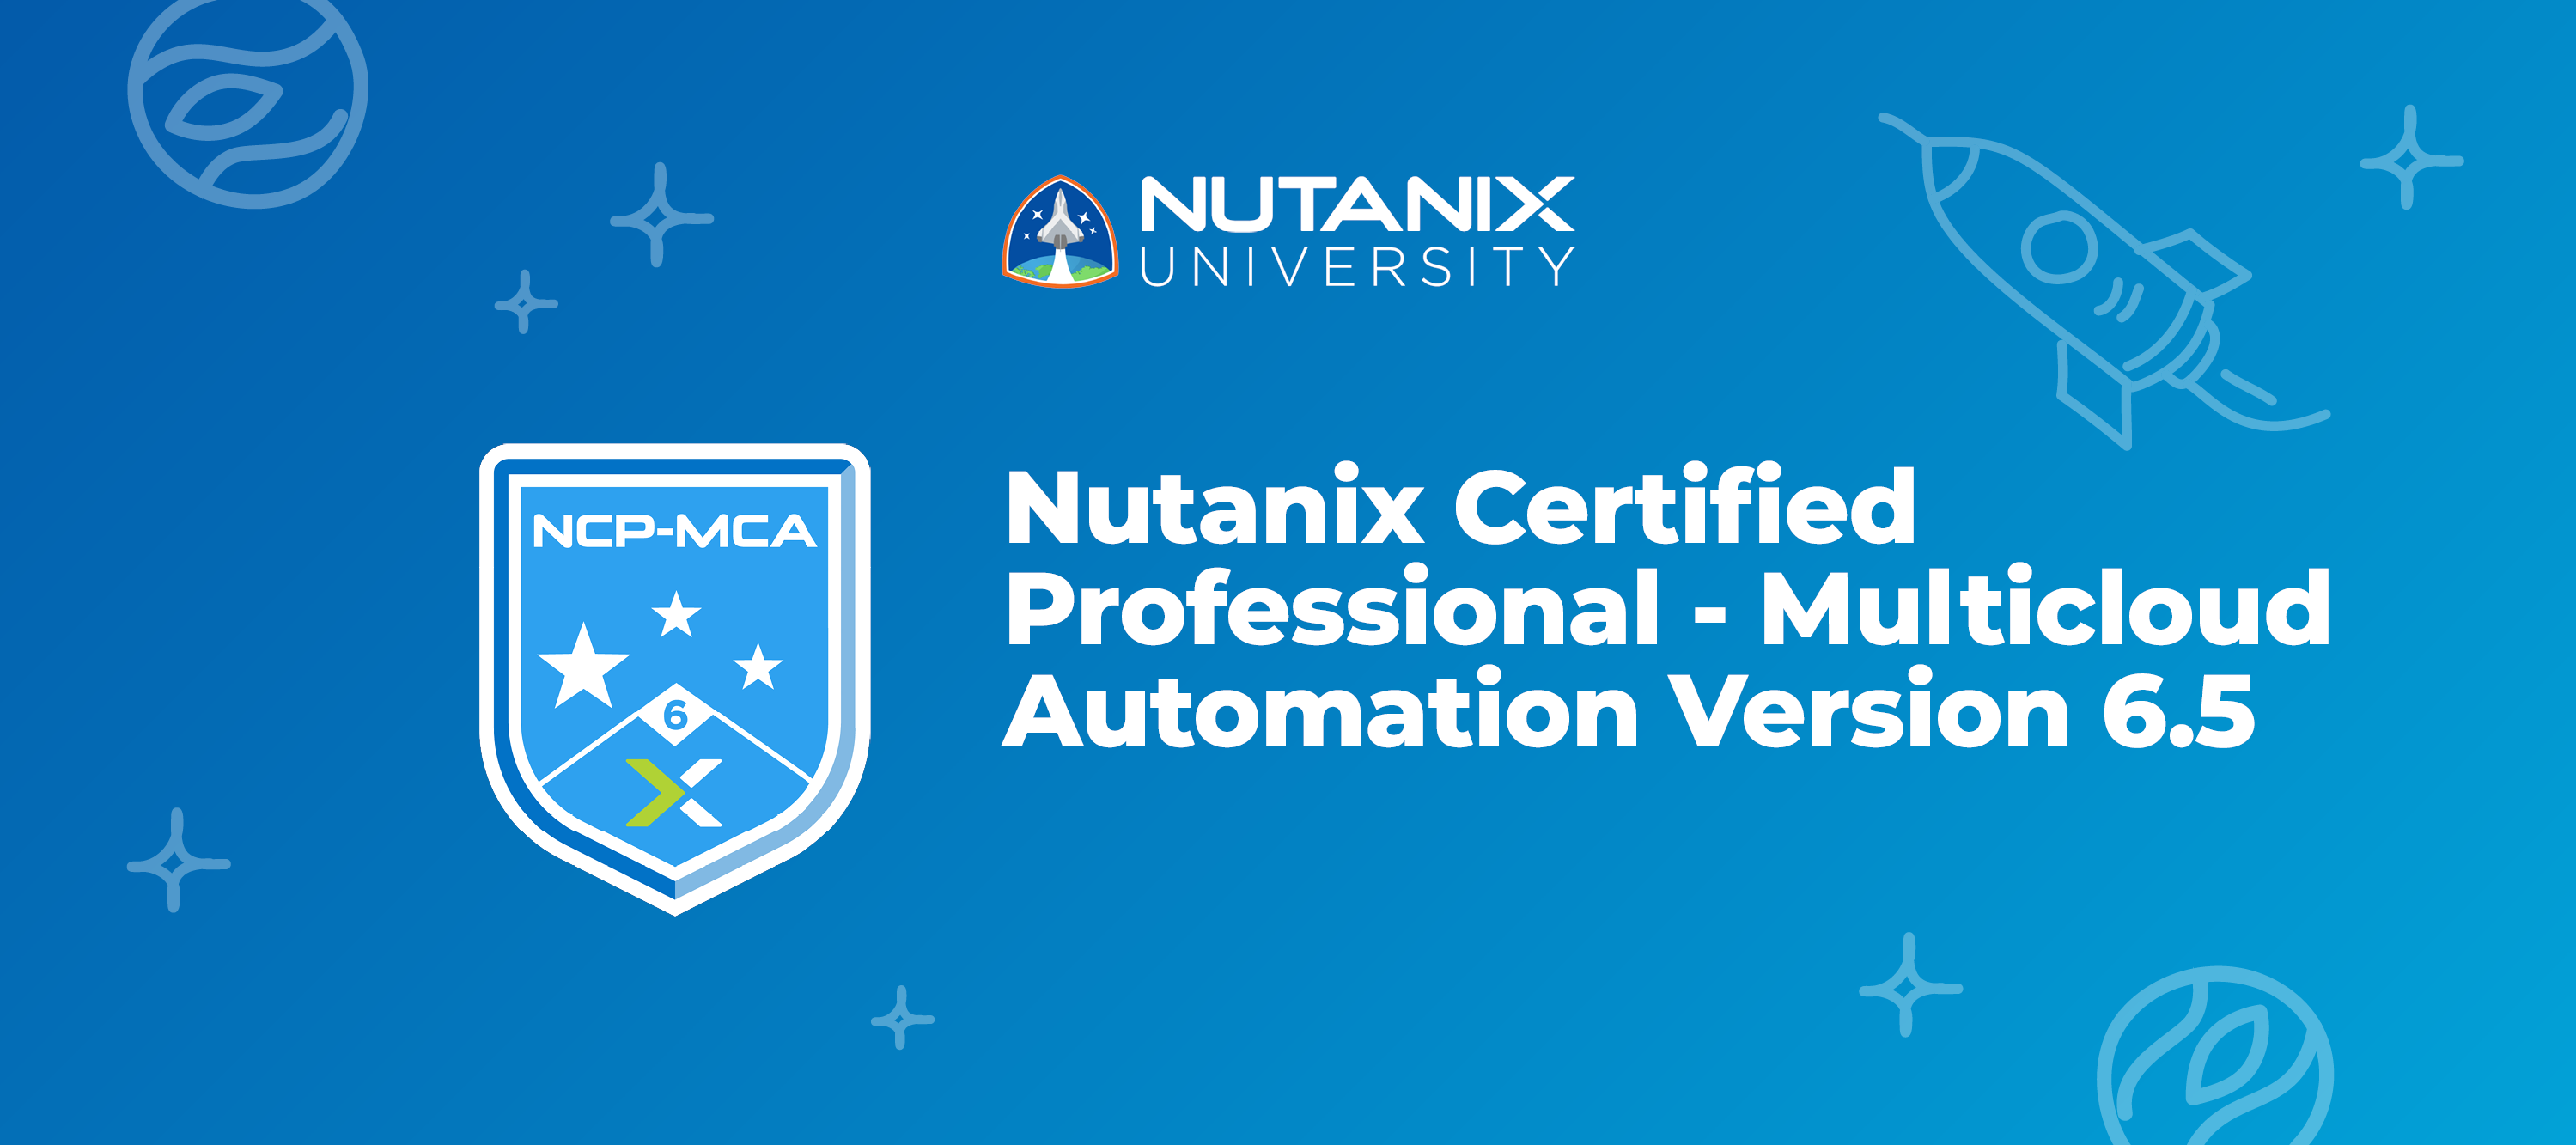 Validate Your Nutanix Cloud Manager Self-Service Skills + Access Special Offer